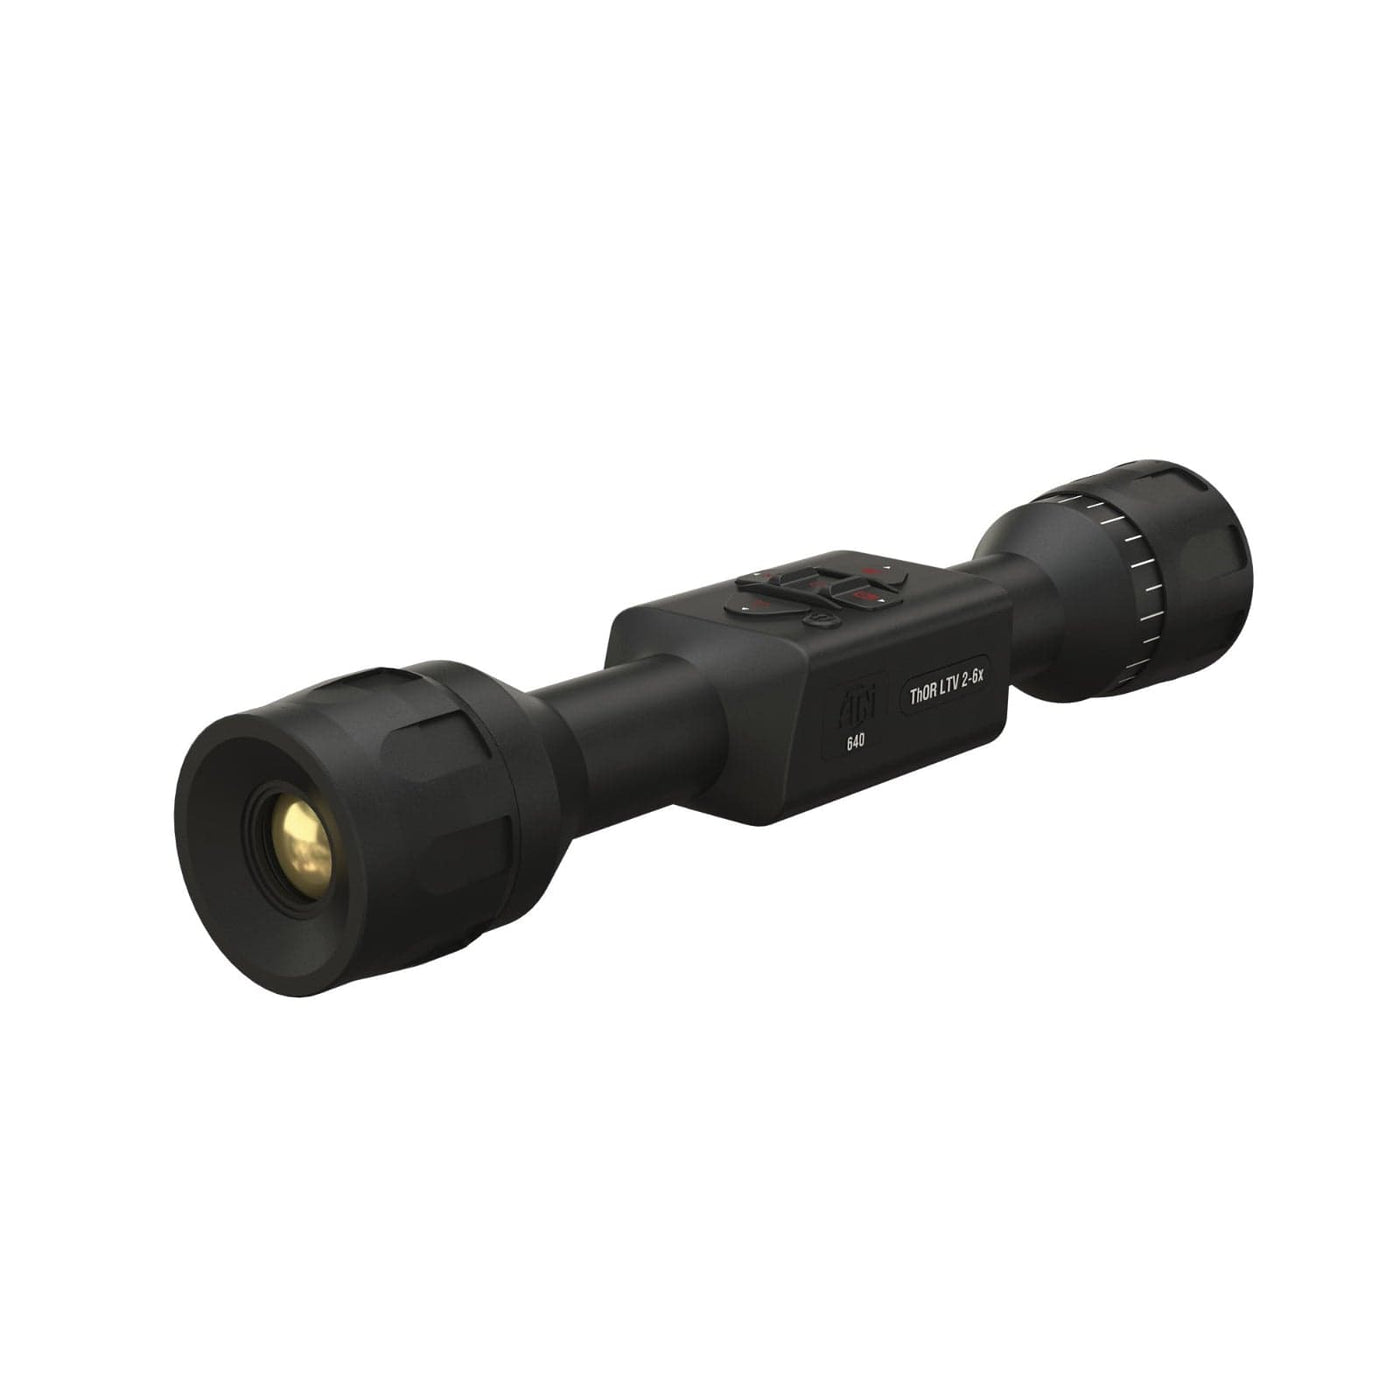 ATN ATN Thor LTV 2-6x 640x480 12 mic Thermal Rifle Scope w Video Nightvision And Thermal